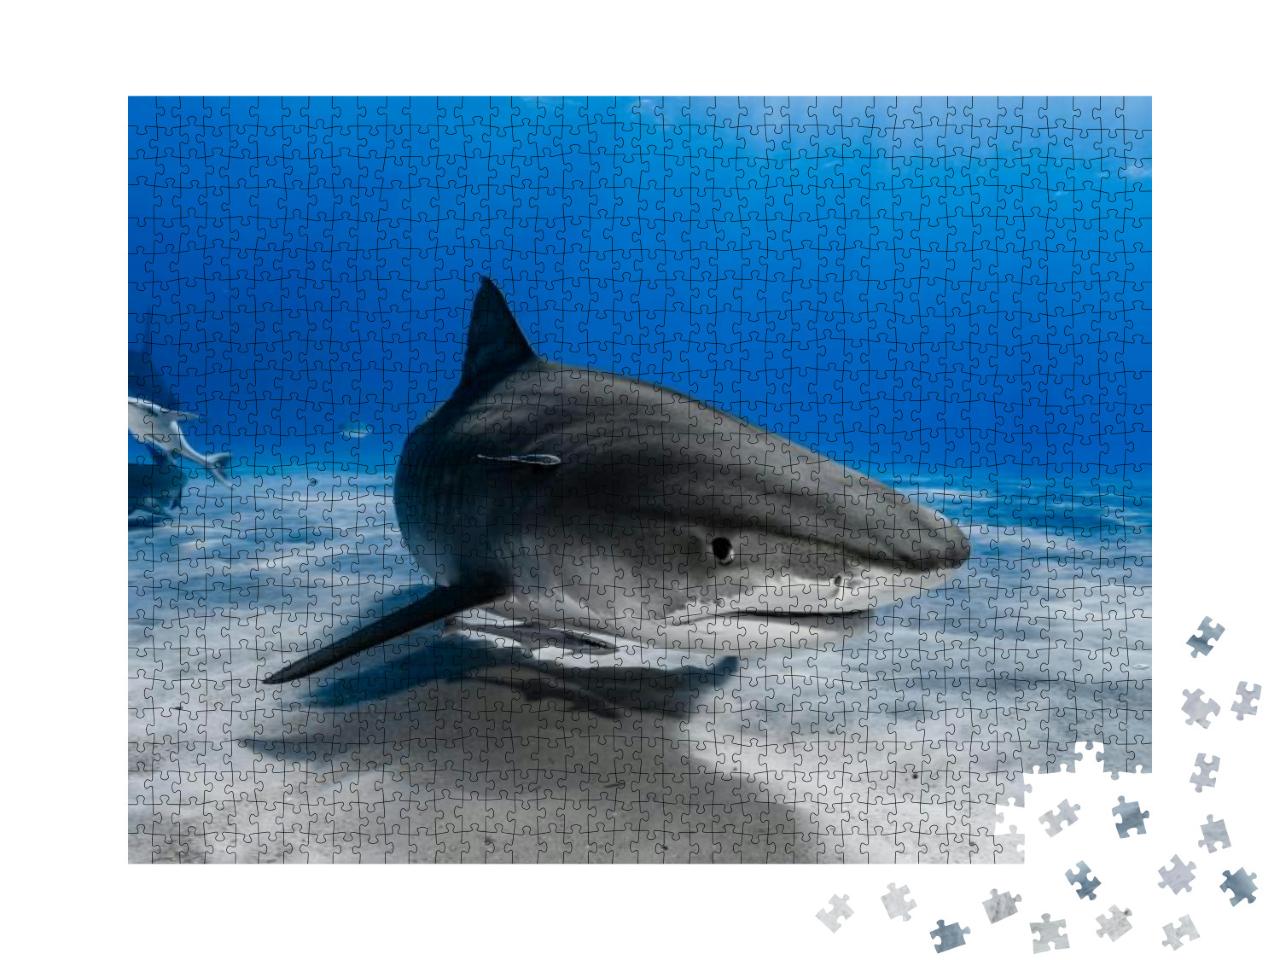 Tiger Shark Galeocerdo Cuvier Swimming Over the Reef... Jigsaw Puzzle with 1000 pieces